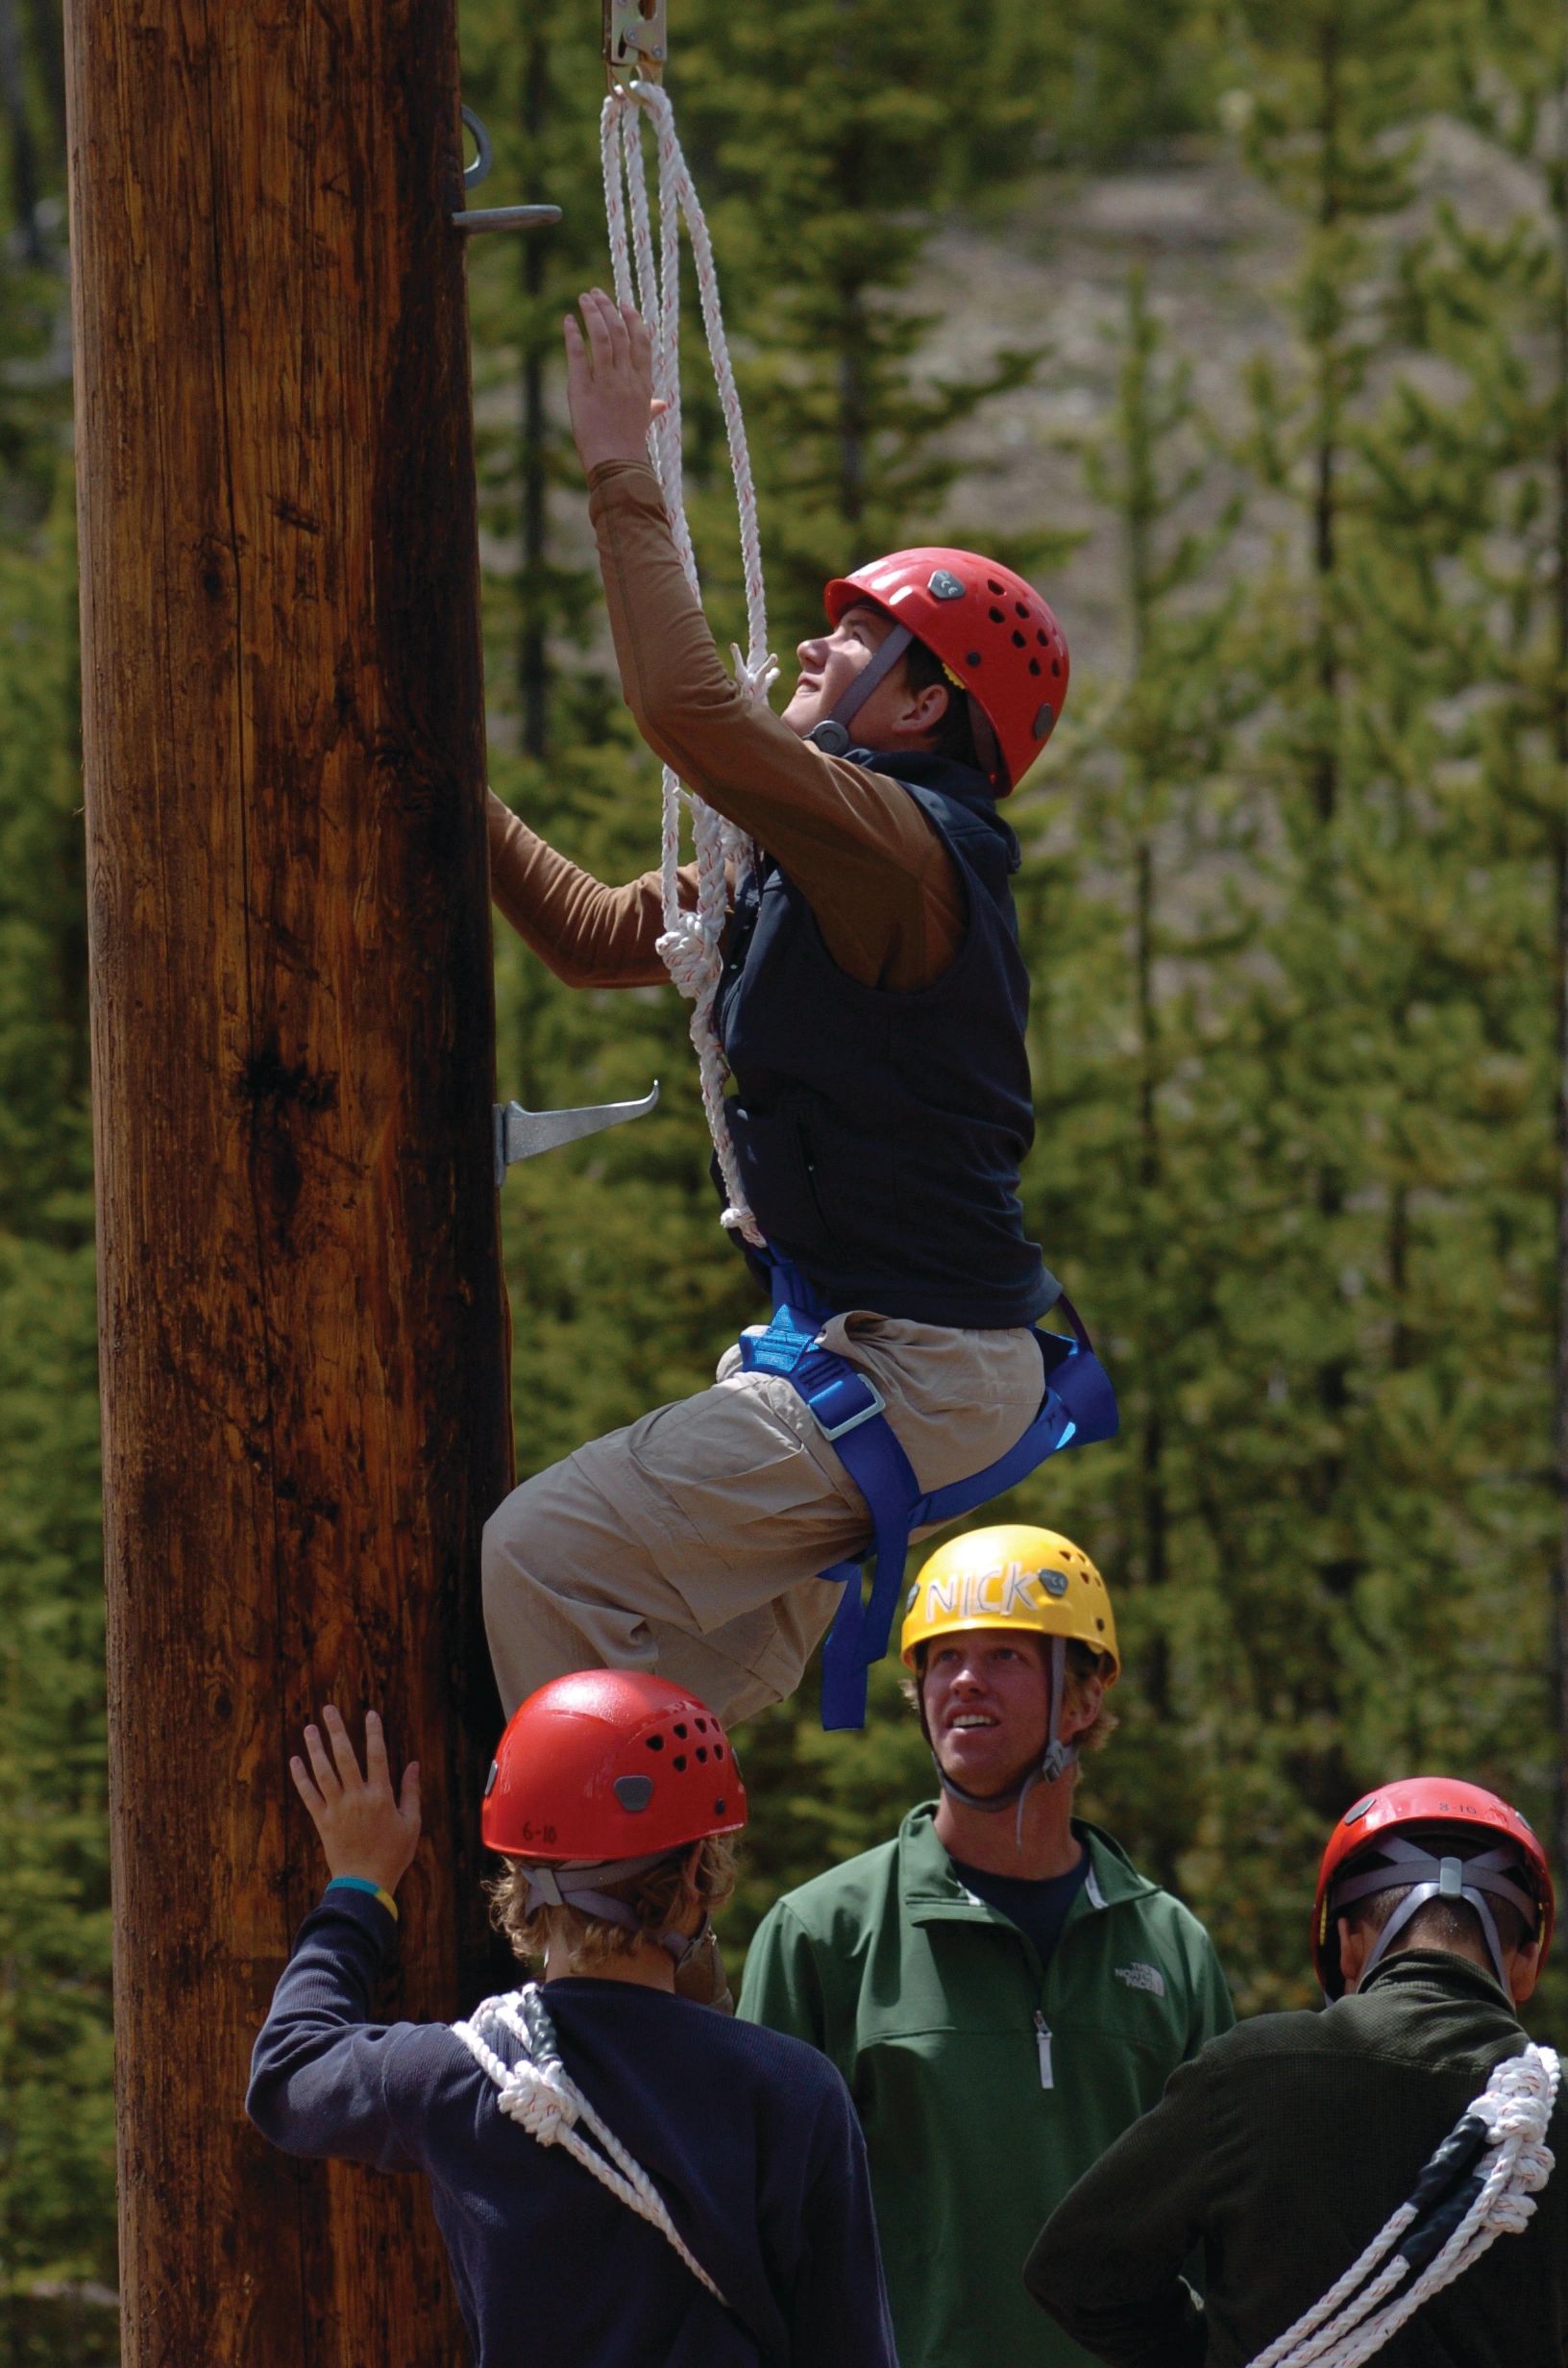 High Ropes Course Staff Training exercise at a Michigan aerial adventure park.